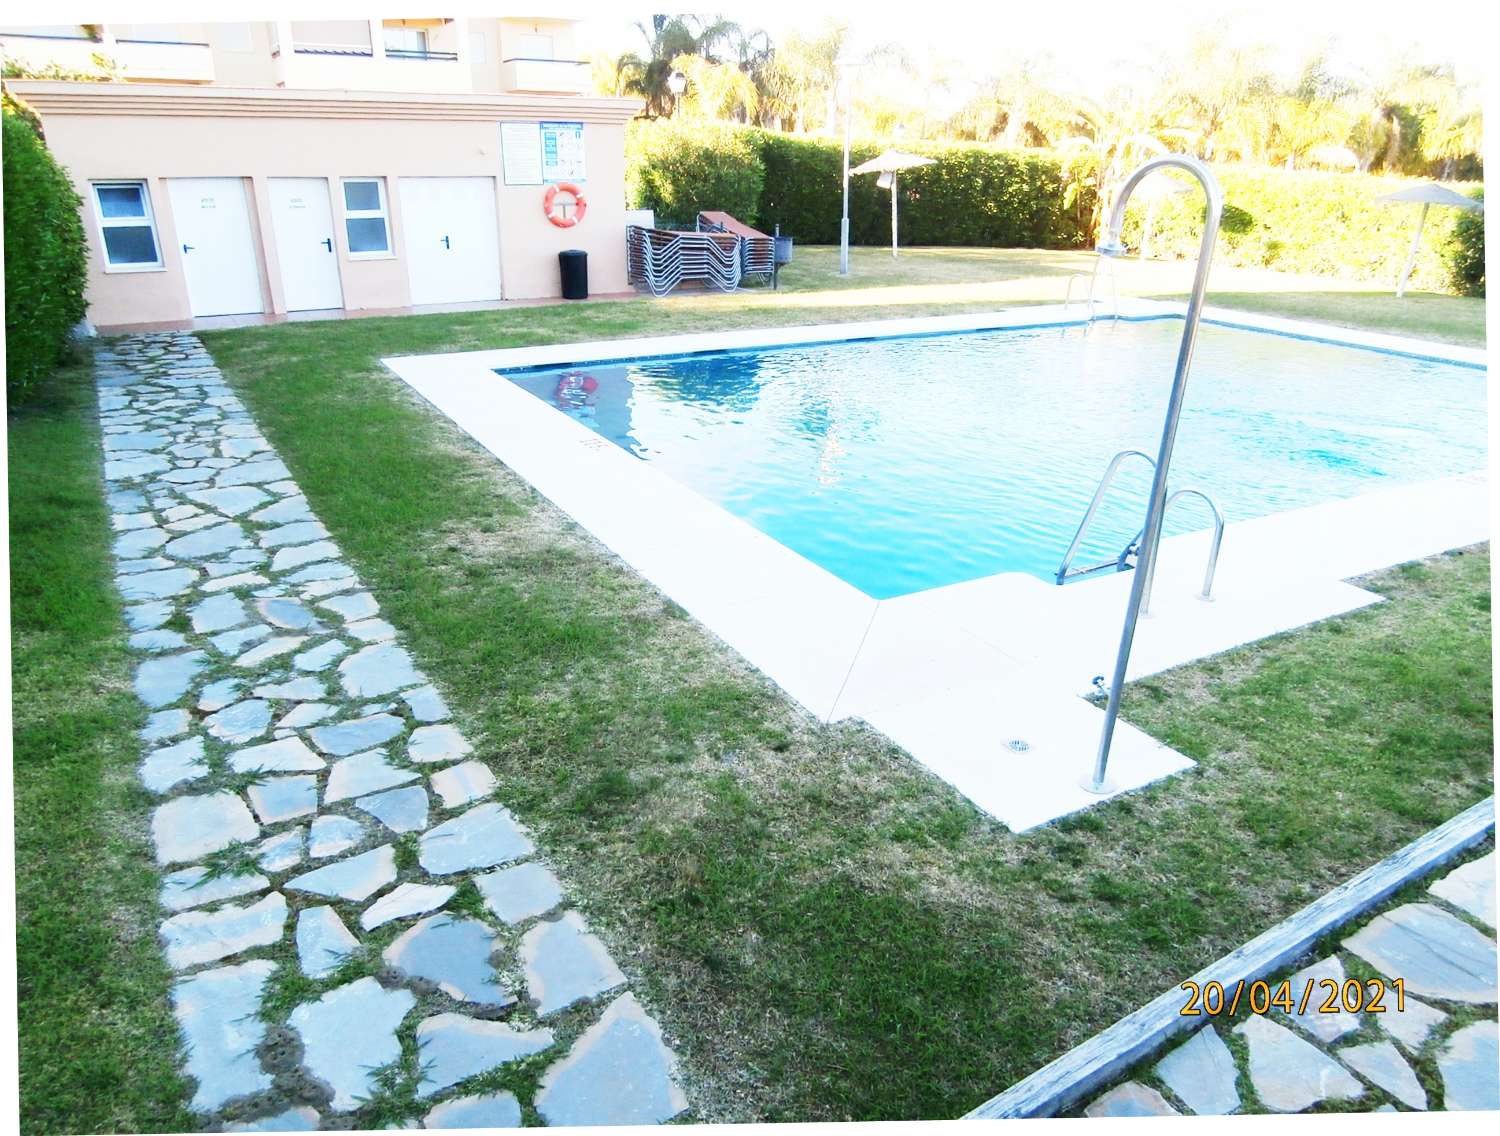 Excellent ground floor apartment with large garden for sale located in the area of Cancelada Estepona, 13 km from Puerto Banus.